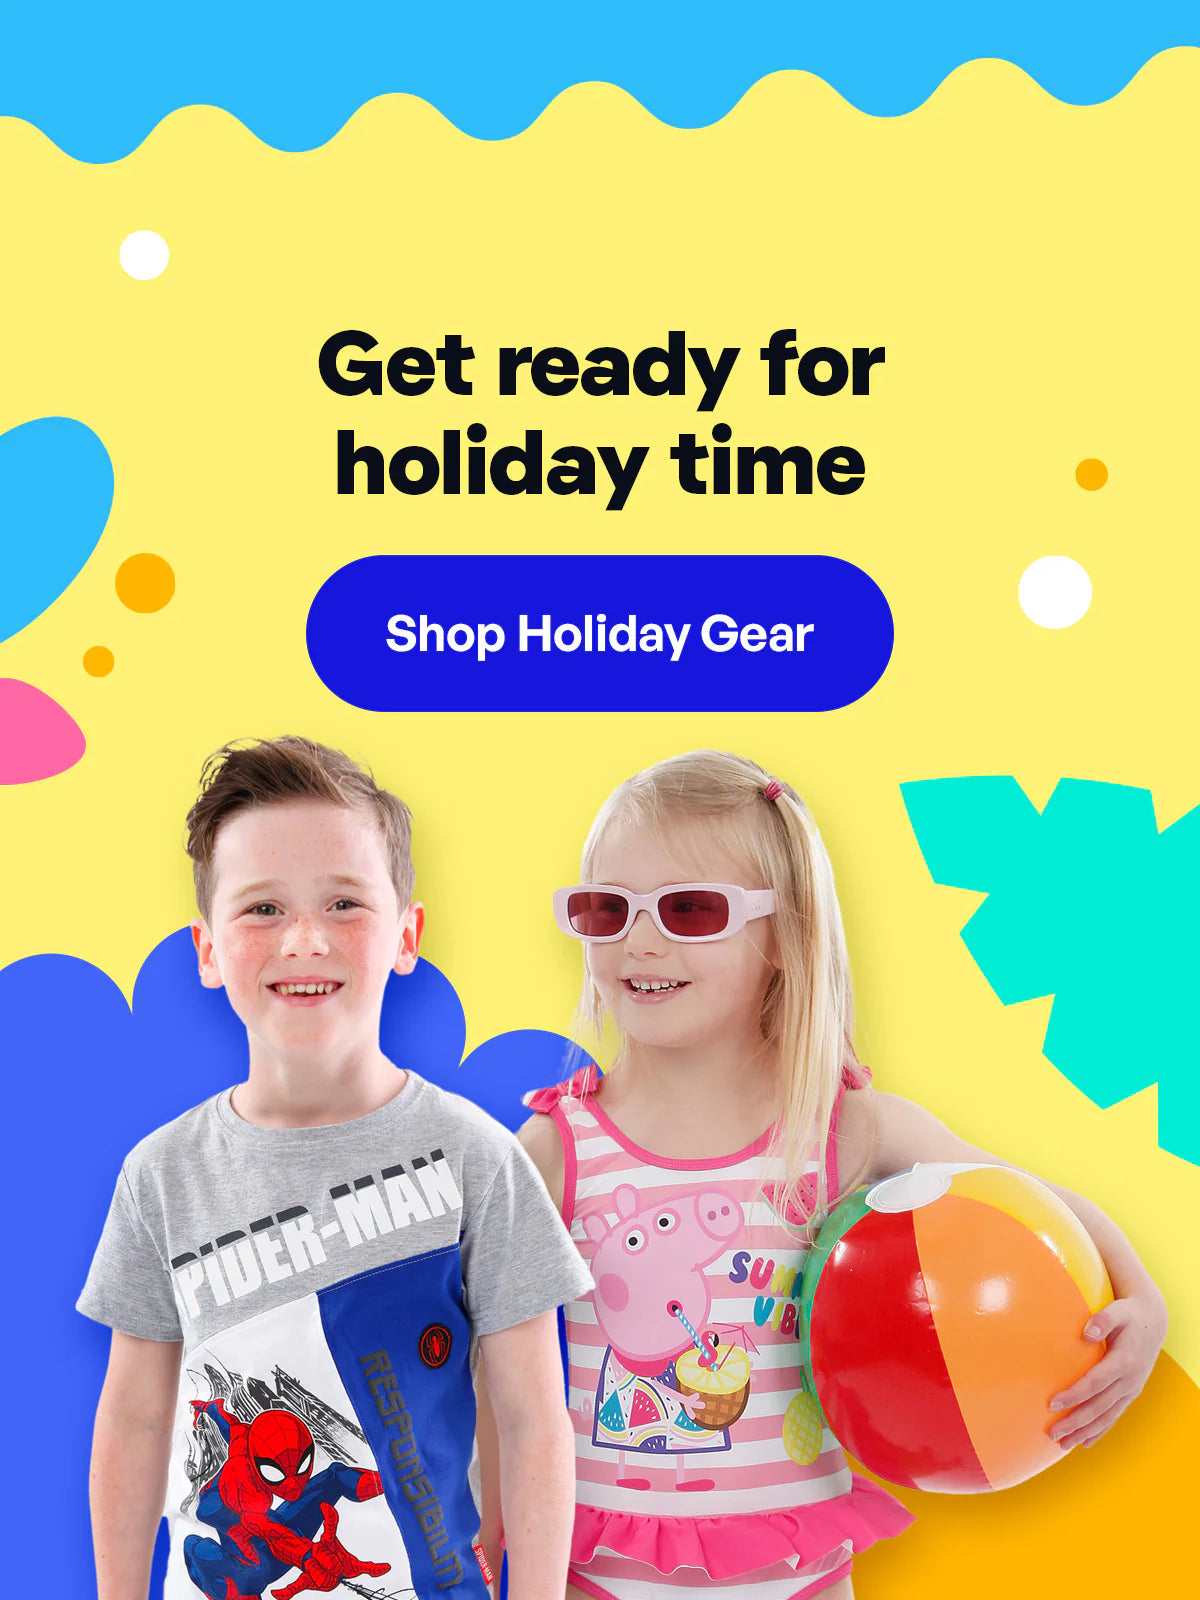 Get ready for holiday time - Shop holiday gear. young girl wearing a Peppa Pig swimming costume standing next to a young boy wearing a Spider-Man T-Shirt.